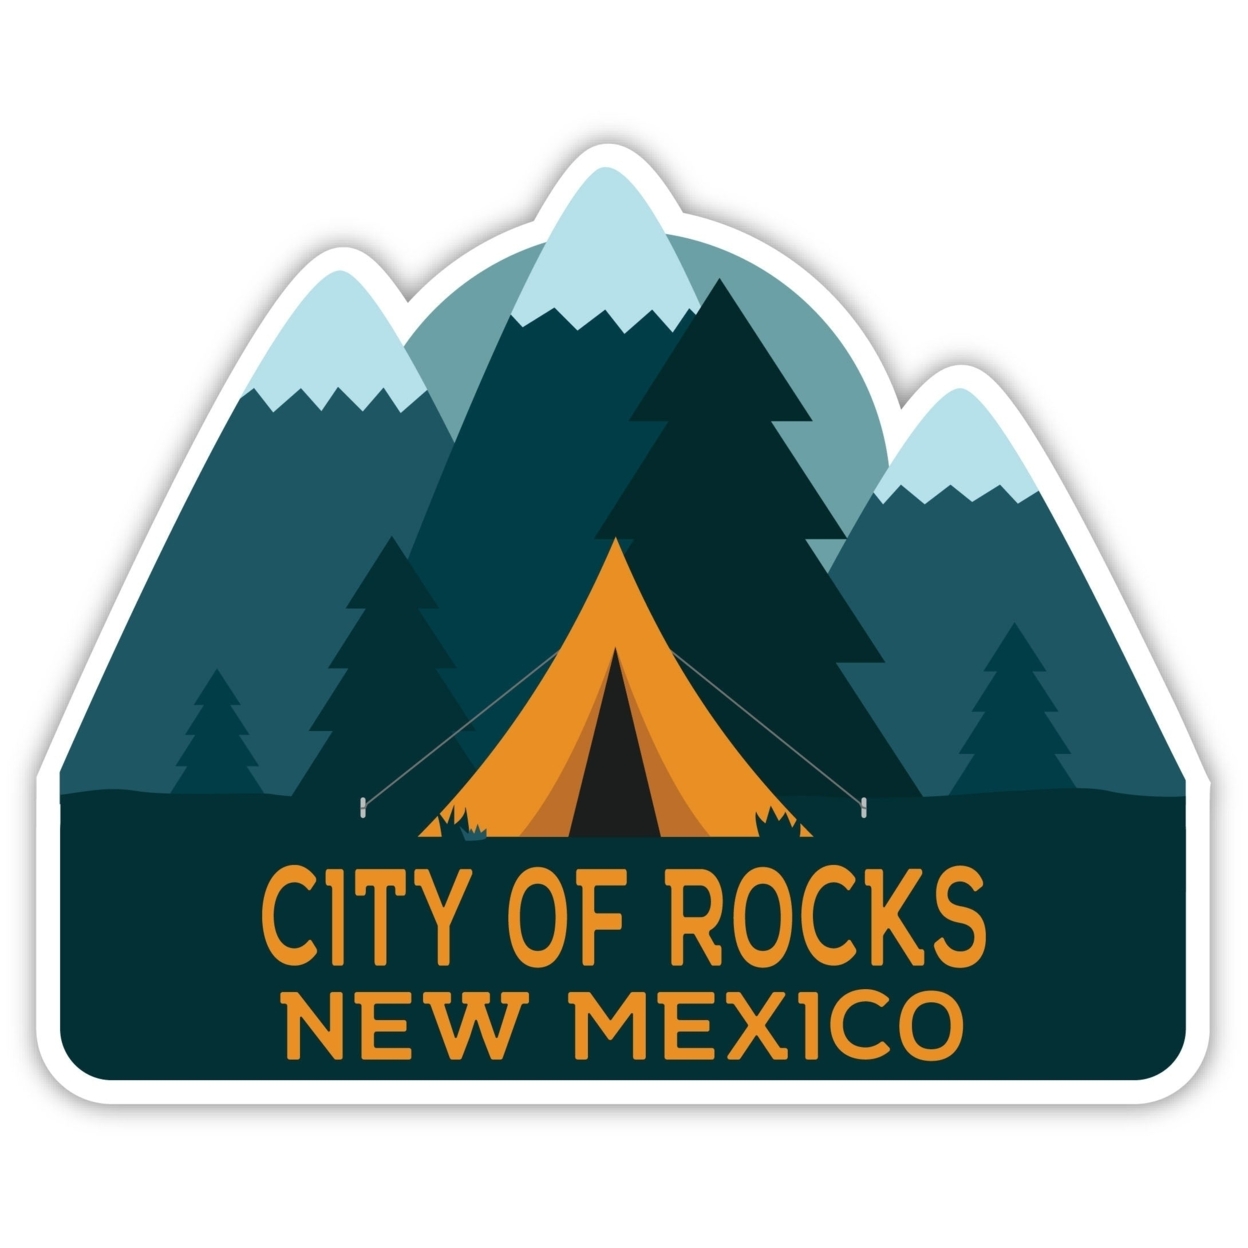 City Of Rocks New Mexico Souvenir Decorative Stickers (Choose Theme And Size) - 4-Pack, 4-Inch, Tent